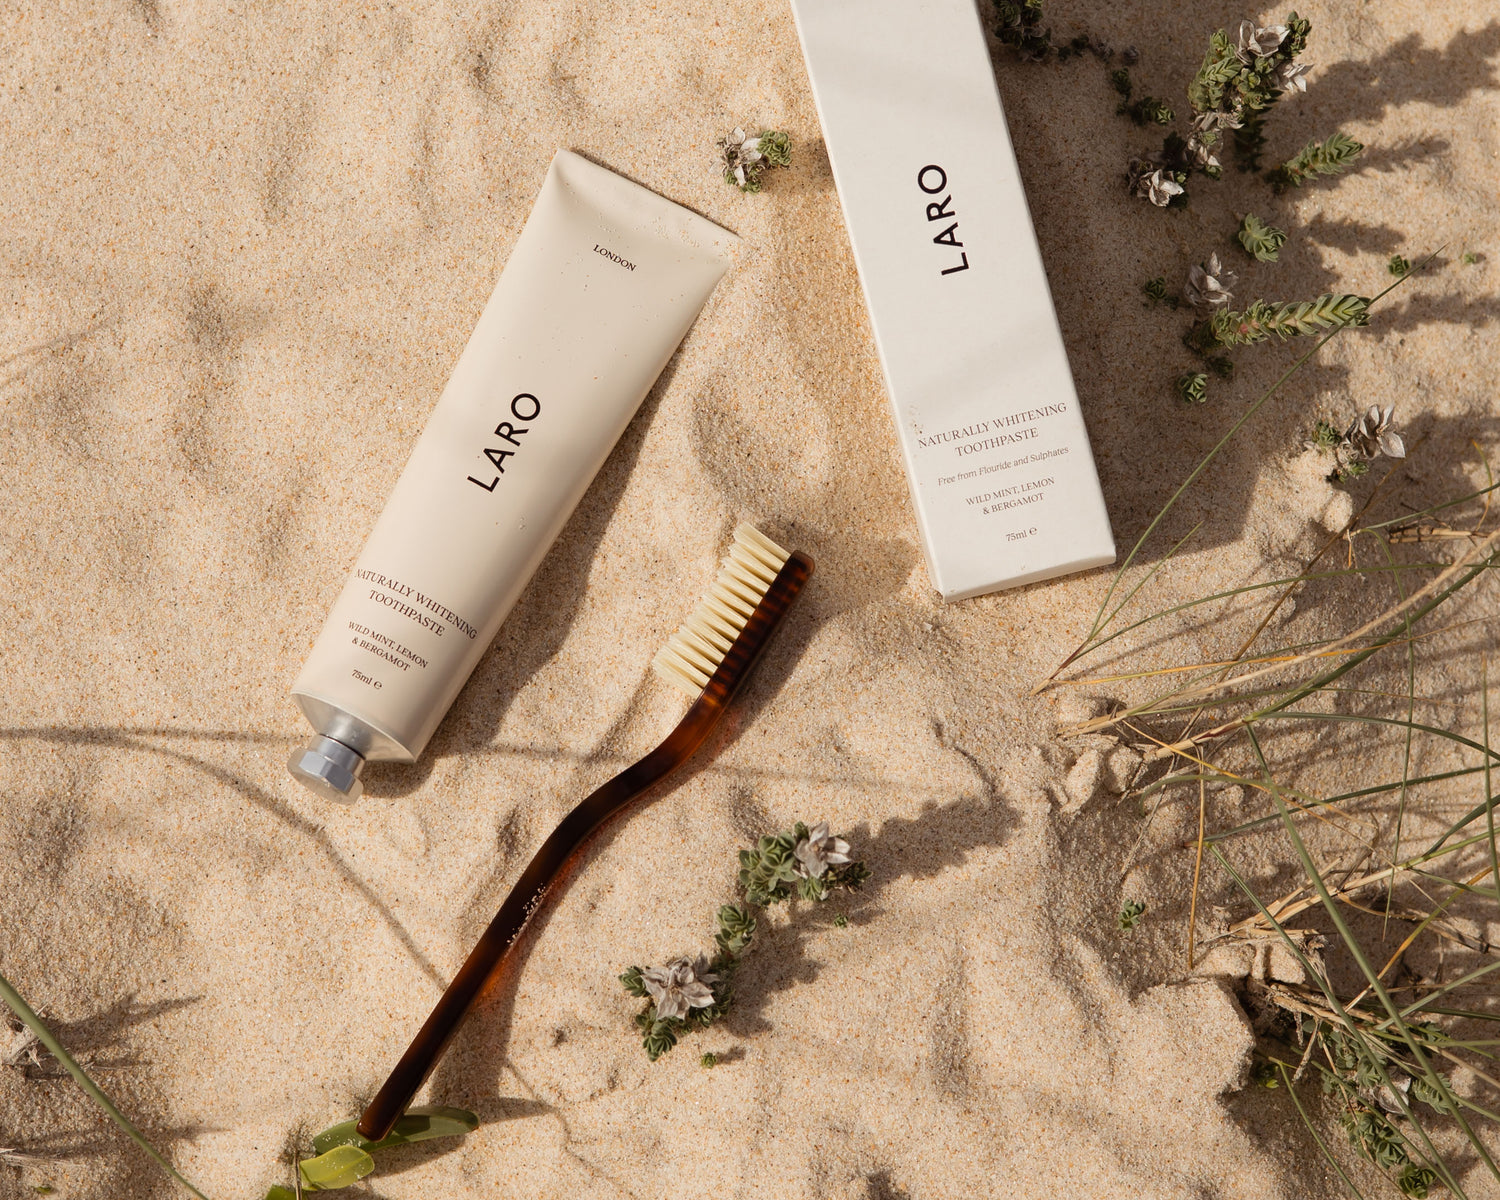 Beach landscape with a Laro aluminium Naturally Whitening Toothpaste tube, a packaging box for the toothpaste and a brown cellulose acetate toothbrush lying in the sand, with beach green grass and flower shoots surrounding. 